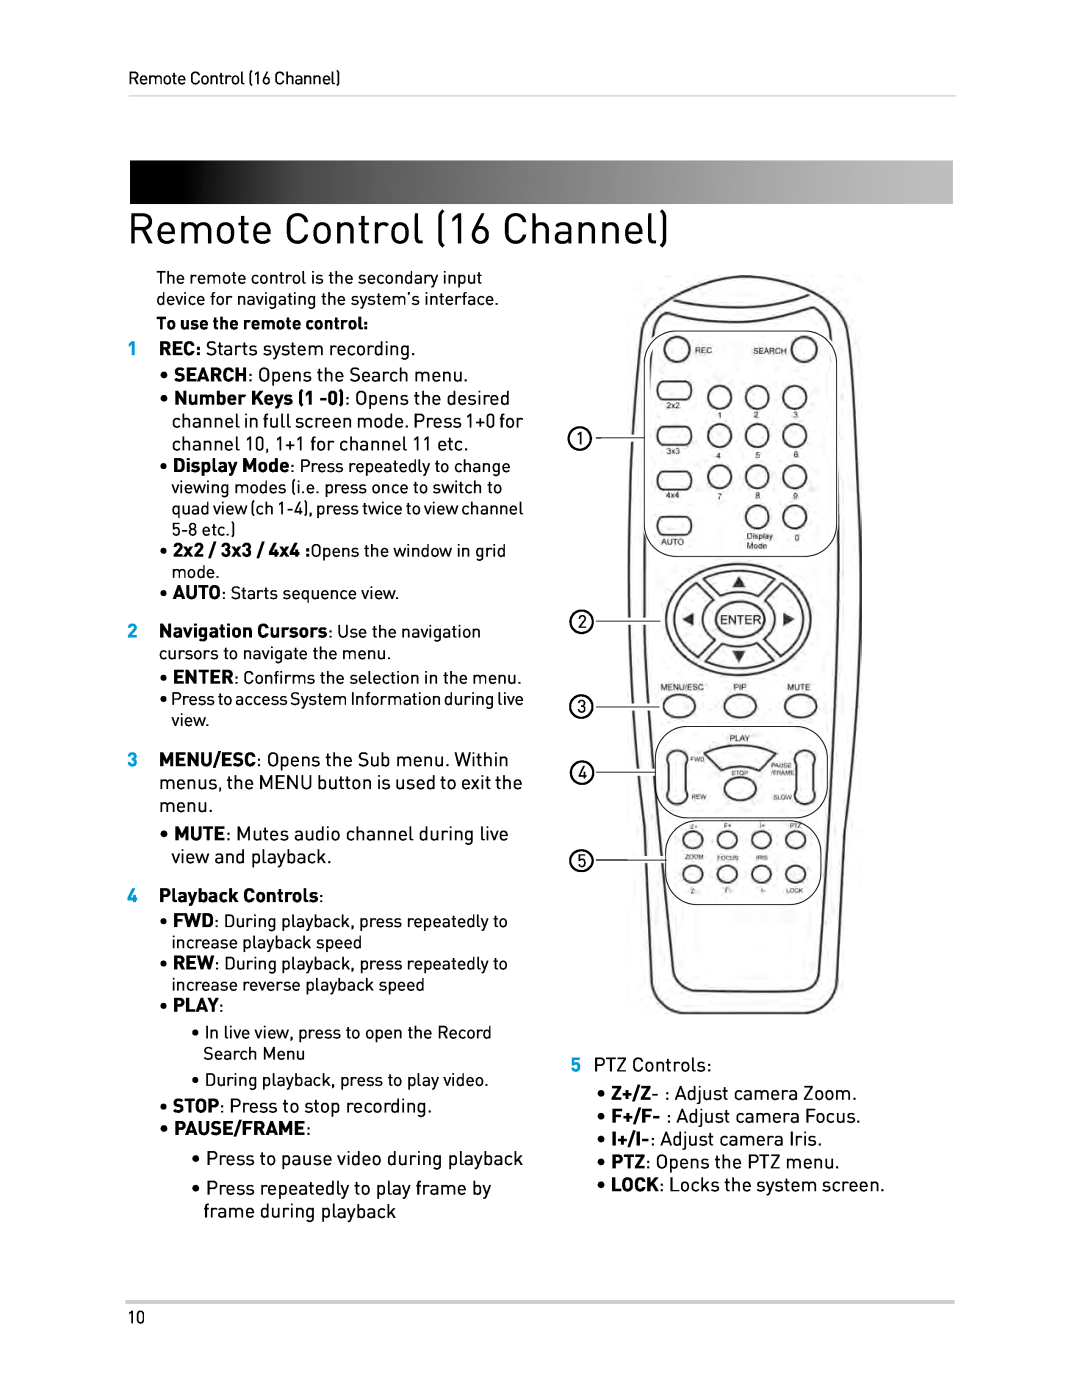 Lorex 16 channel security dvr with 500GB hard drive, remote viewing manual Remote Control 16 Channel, Playback Controls 